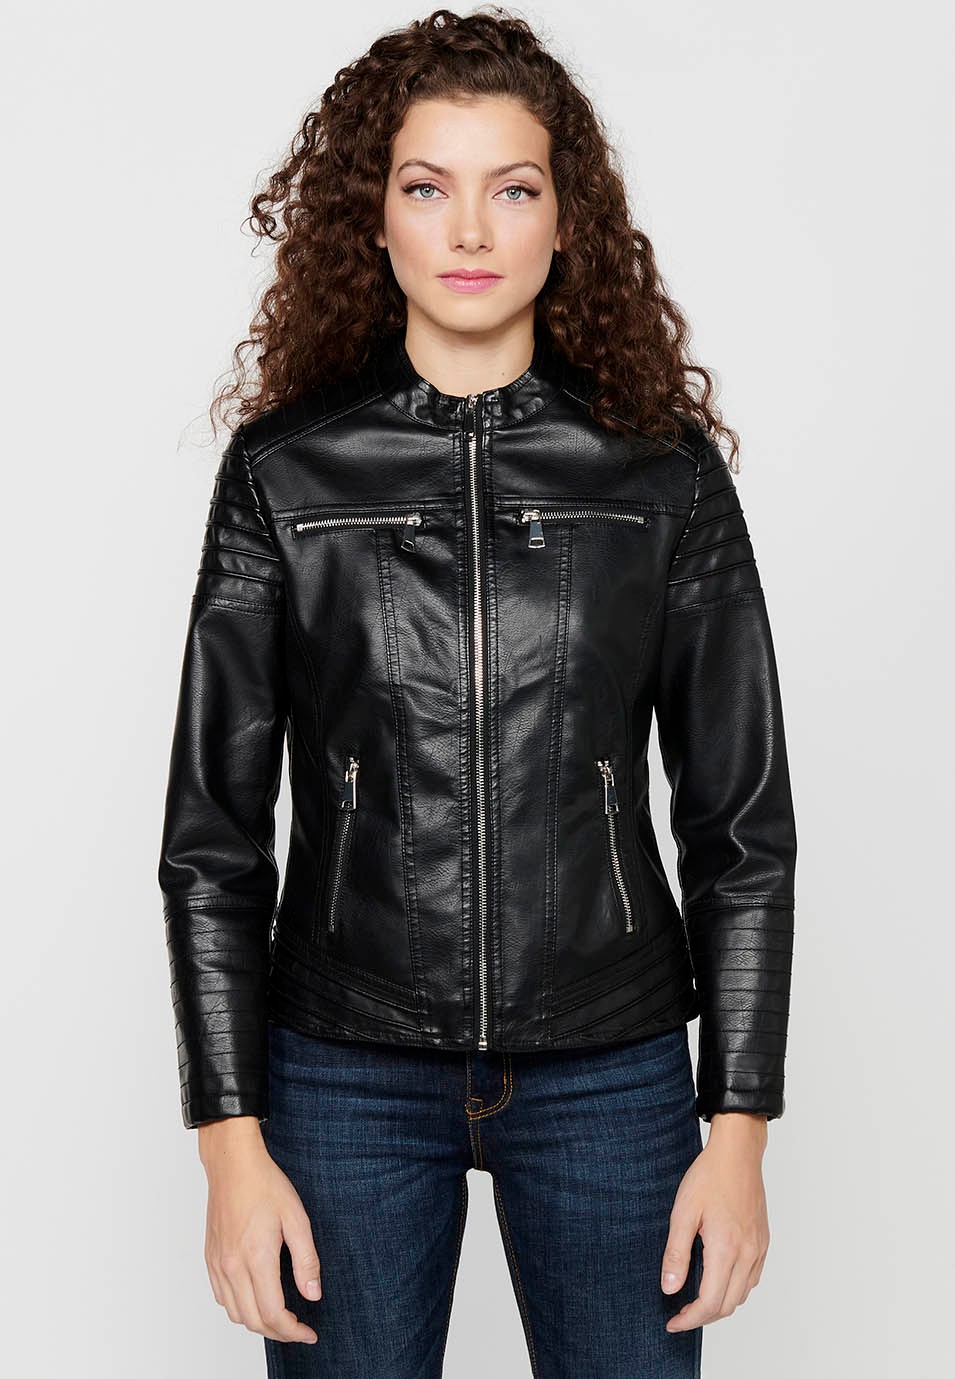 Long-sleeved jacket with zipper front closure and mandarin collar with details on the sleeves and shoulders in Black for Women 2